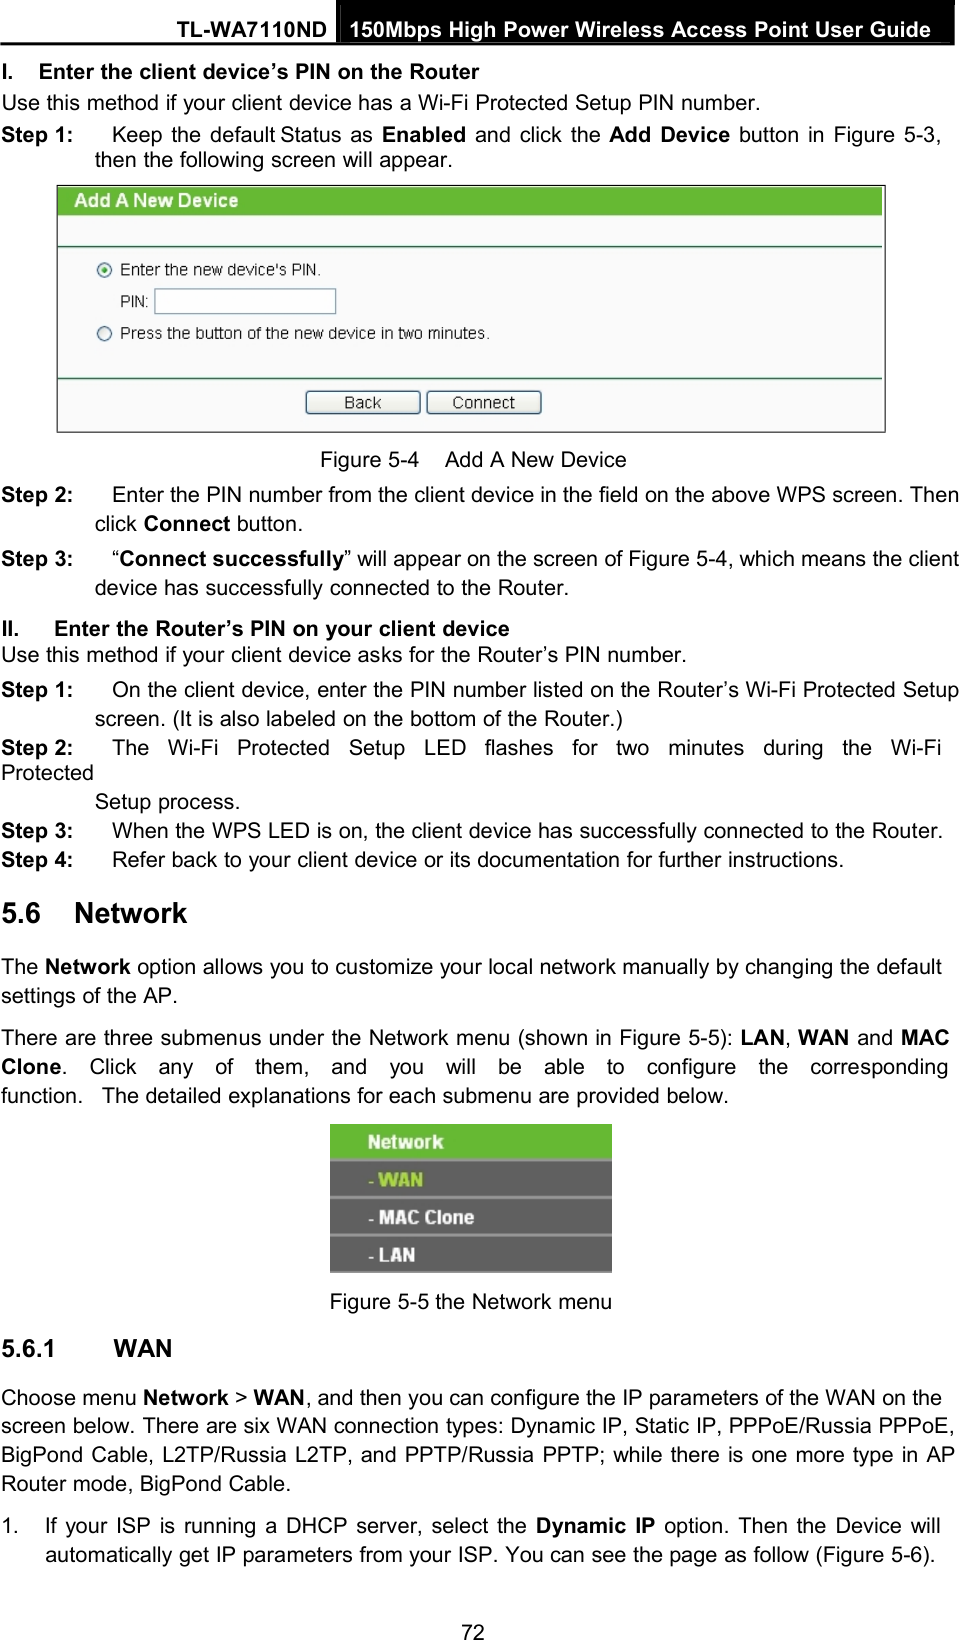 TL-WA7110ND 150Mbps High Power Wireless Access Point User GuideI. Enter the client device’s PIN on the RouterUse this method if your client device has a Wi-Fi Protected Setup PIN number.Step 1: Keep the default Status as Enabled and click the Add Device button in Figure 5-3,then the following screen will appear.Figure 5-4 Add A New DeviceStep 2: Enter the PIN number from the client device in the field on the above WPS screen. Thenclick Connect button.Step 3: “Connect successfully” will appear on the screen of Figure 5-4, which means the clientdevice has successfully connected to the Router.II. Enter the Router’s PIN on your client deviceUse this method if your client device asks for the Router’s PIN number.Step 1: On the client device, enter the PIN number listed on the Router’s Wi-Fi Protected Setupscreen. (It is also labeled on the bottom of the Router.)Step 2: The Wi-Fi Protected Setup LED flashes for two minutes during the Wi-FiProtectedSetup process.Step 3: When the WPS LED is on, the client device has successfully connected to the Router.Step 4: Refer back to your client device or its documentation for further instructions.5.6 NetworkThe Network option allows you to customize your local network manually by changing the defaultsettings of the AP.There are three submenus under the Network menu (shown in Figure 5-5): LAN,WAN and MACClone. Click any of them, and you will be able to configure the correspondingfunction. The detailed explanations for each submenu are provided below.5.6.1 WANFigure 5-5 the Network menuChoose menu Network &gt;WAN, and then you can configure the IP parameters of the WAN on thescreen below. There are six WAN connection types: Dynamic IP, Static IP, PPPoE/Russia PPPoE,BigPond Cable, L2TP/Russia L2TP, and PPTP/Russia PPTP; while there is one more type in APRouter mode, BigPond Cable.1. If your ISP is running a DHCP server, select the Dynamic IP option. Then the Device willautomatically get IP parameters from your ISP. You can see the page as follow (Figure 5-6).72